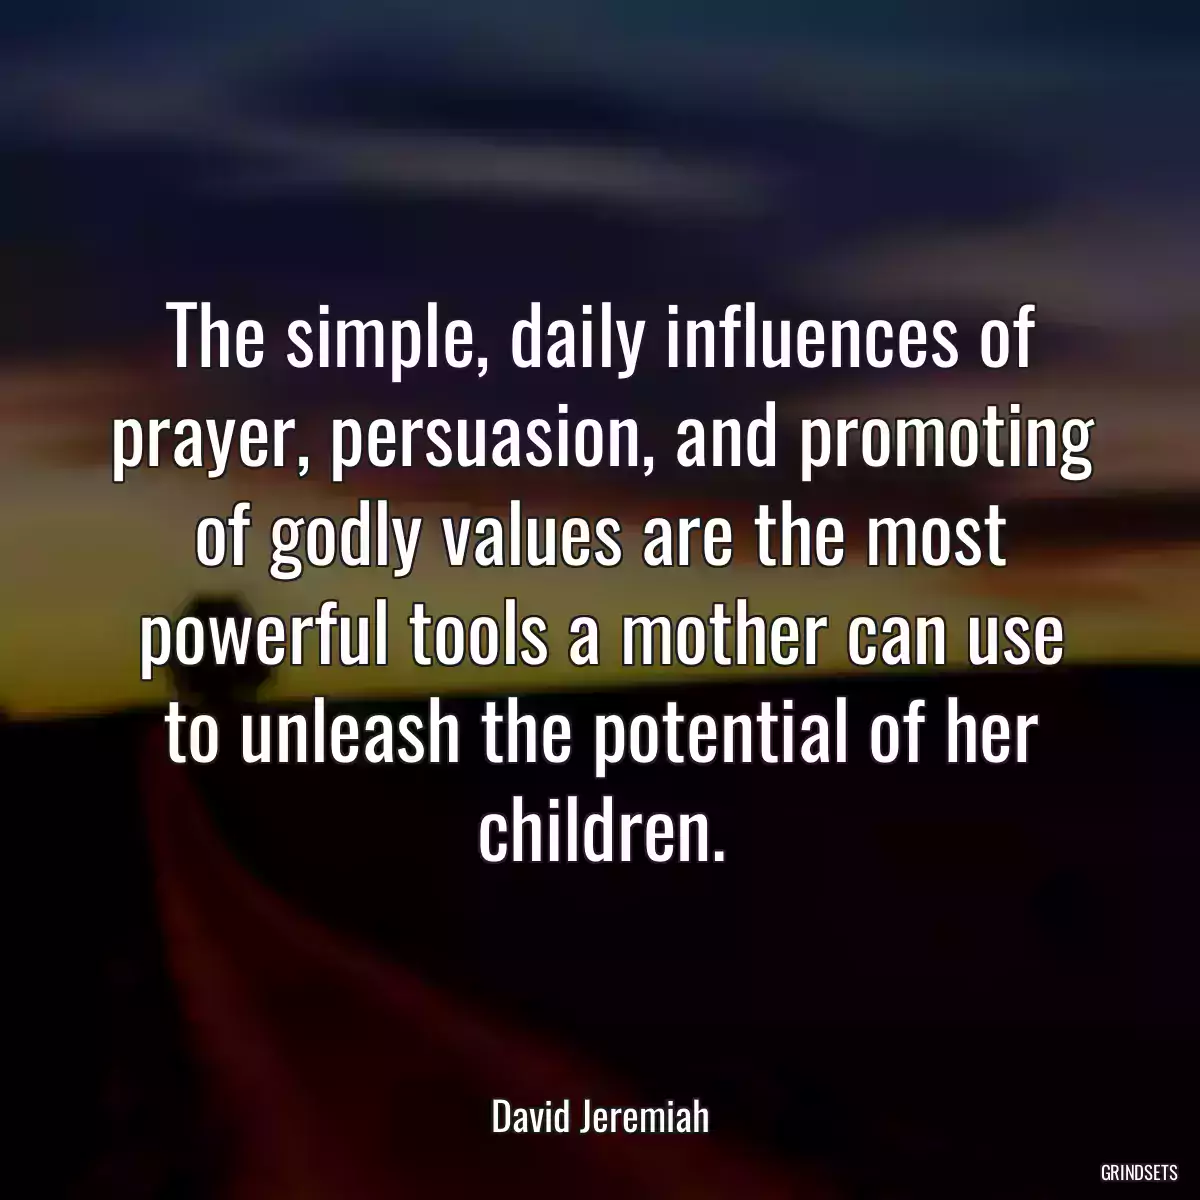 The simple, daily influences of prayer, persuasion, and promoting of godly values are the most powerful tools a mother can use to unleash the potential of her children.